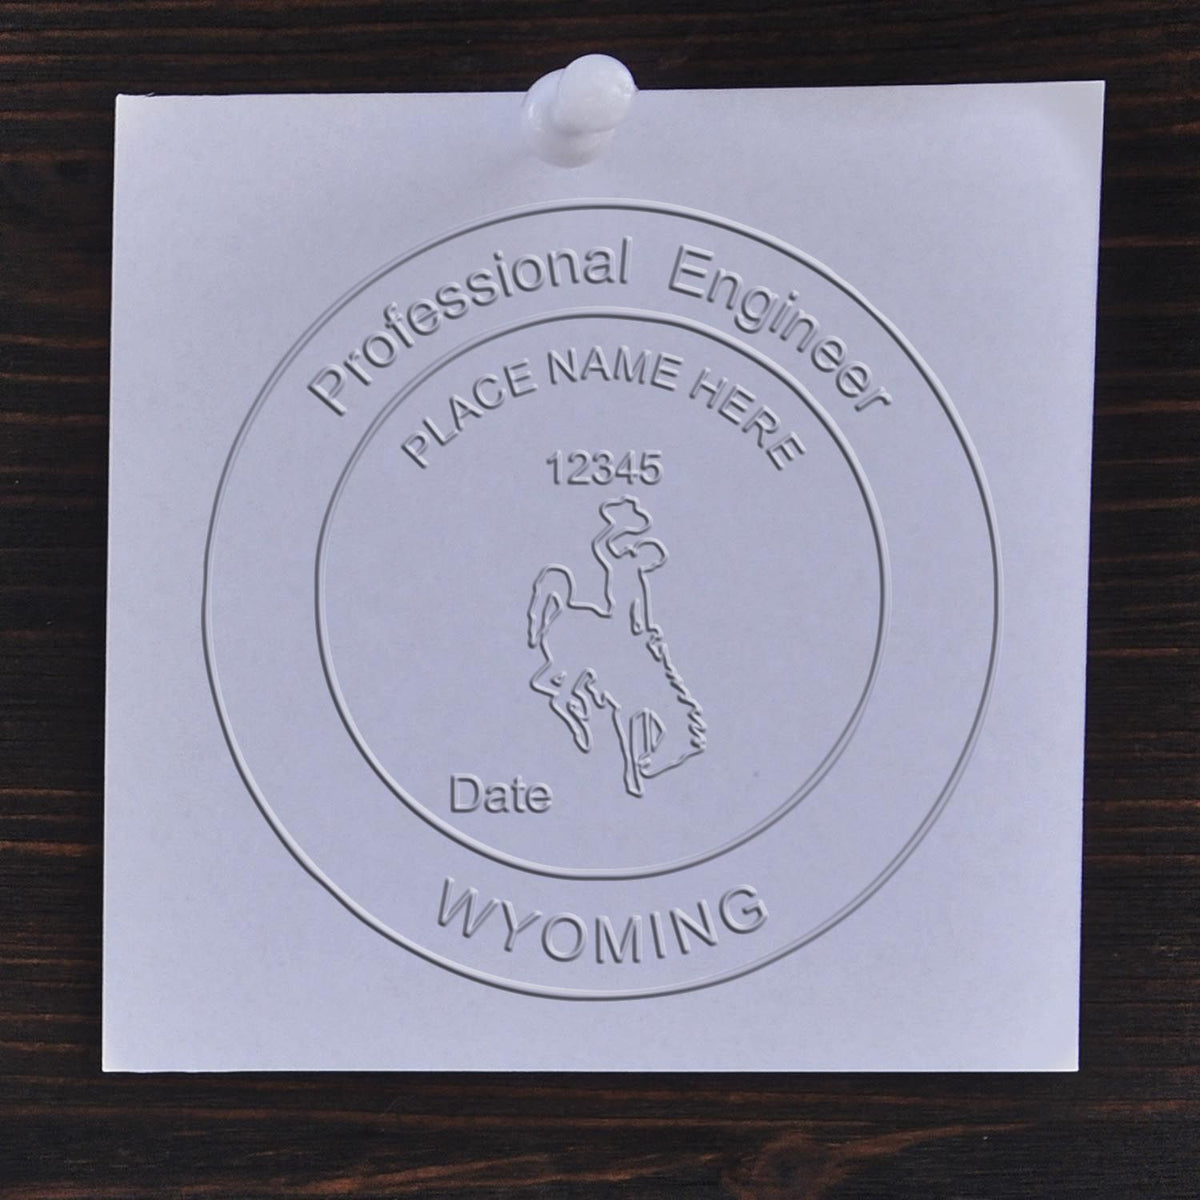 A photograph of the Wyoming Engineer Desk Seal stamp impression reveals a vivid, professional image of the on paper.